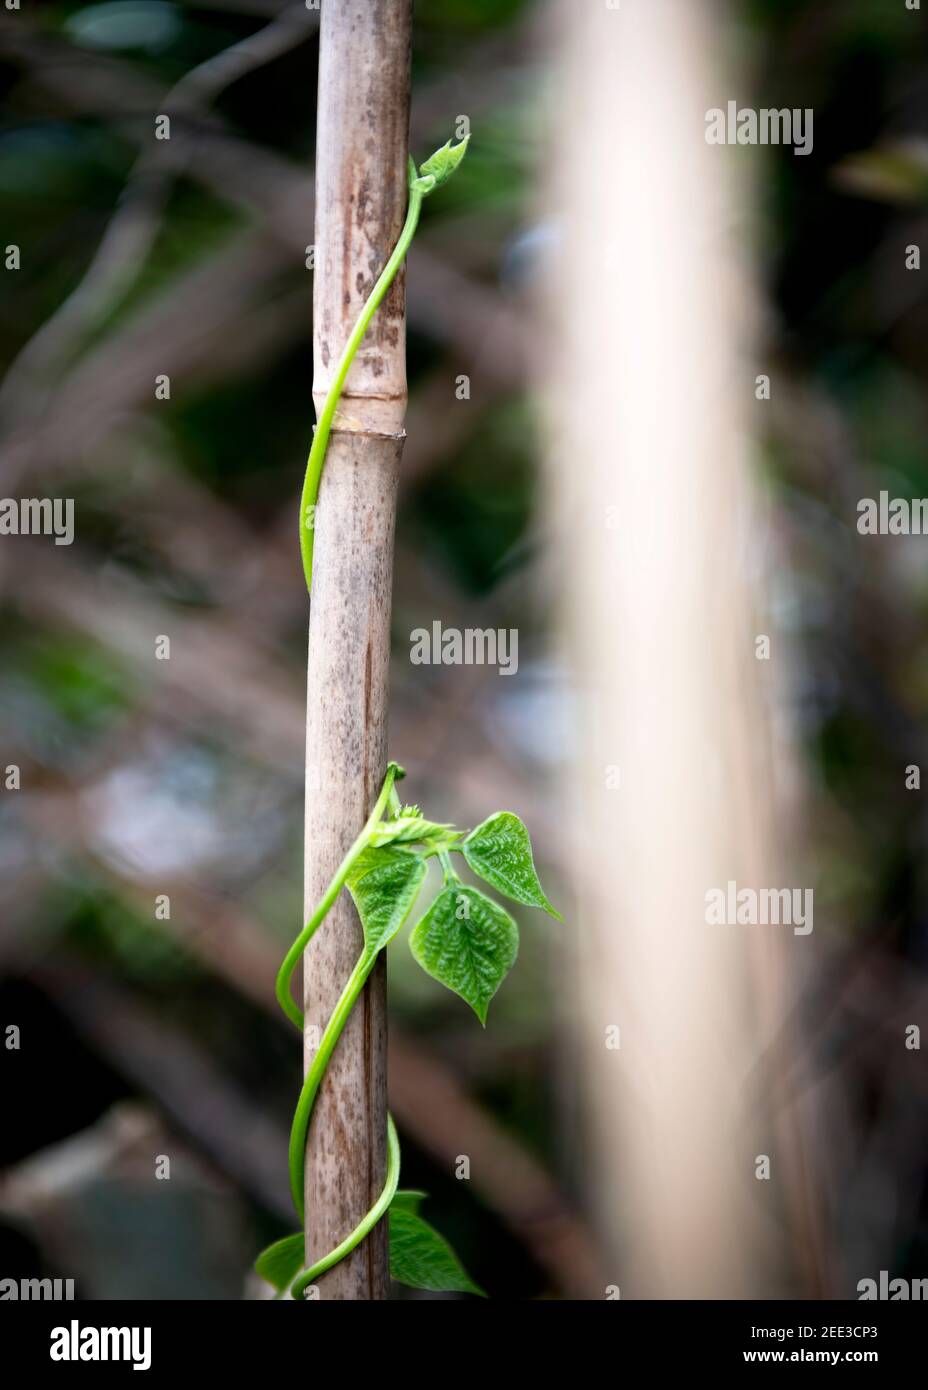 concept of a new growing season  showing a young bean plant climbing up a ole in a garden or allotment  image short for a background and text overlay Stock Photo